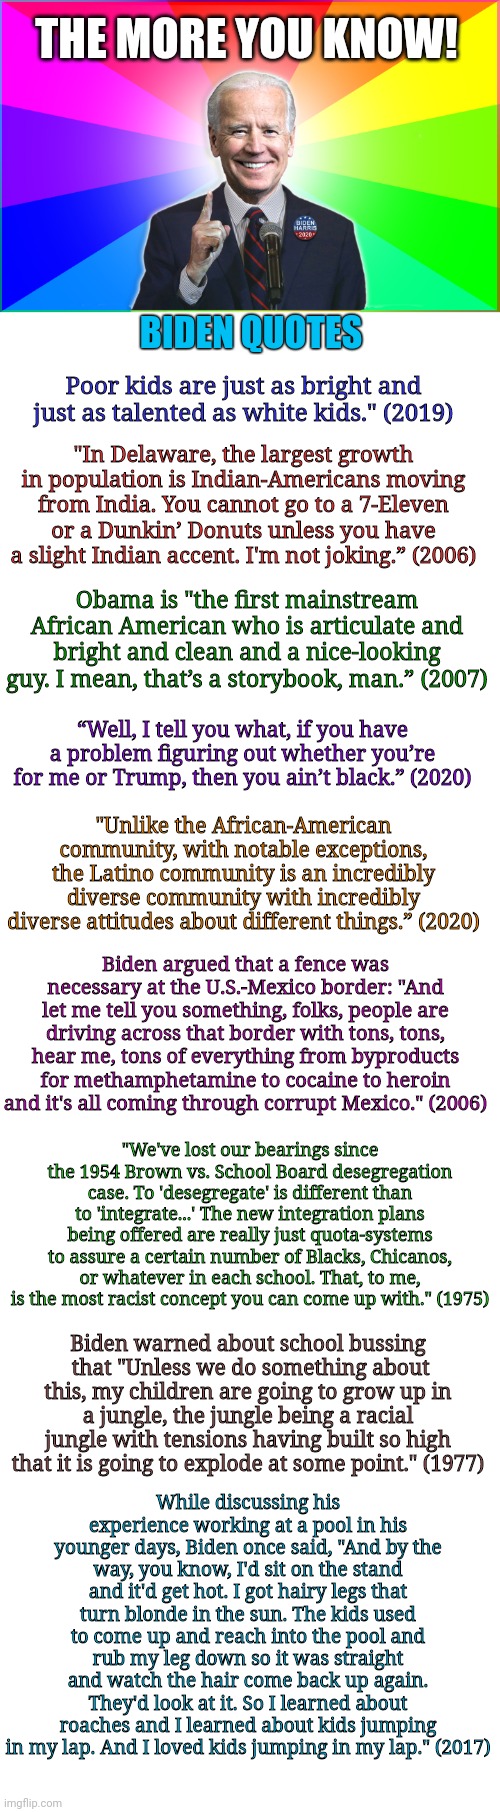 Racist Biden Quotes | THE MORE YOU KNOW! BIDEN QUOTES; Poor kids are just as bright and just as talented as white kids." (2019); "In Delaware, the largest growth in population is Indian-Americans moving from India. You cannot go to a 7-Eleven or a Dunkin’ Donuts unless you have a slight Indian accent. I'm not joking.” (2006); Obama is "the first mainstream African American who is articulate and bright and clean and a nice-looking guy. I mean, that’s a storybook, man.” (2007); “Well, I tell you what, if you have a problem figuring out whether you’re for me or Trump, then you ain’t black.” (2020); "Unlike the African-American community, with notable exceptions, the Latino community is an incredibly diverse community with incredibly diverse attitudes about different things.” (2020); Biden argued that a fence was necessary at the U.S.-Mexico border: "And let me tell you something, folks, people are driving across that border with tons, tons, hear me, tons of everything from byproducts for methamphetamine to cocaine to heroin and it's all coming through corrupt Mexico." (2006); "We've lost our bearings since the 1954 Brown vs. School Board desegregation case. To 'desegregate' is different than to 'integrate...' The new integration plans being offered are really just quota-systems to assure a certain number of Blacks, Chicanos, or whatever in each school. That, to me, is the most racist concept you can come up with." (1975); Biden warned about school bussing  that "Unless we do something about this, my children are going to grow up in a jungle, the jungle being a racial jungle with tensions having built so high that it is going to explode at some point." (1977); While discussing his experience working at a pool in his younger days, Biden once said, "And by the way, you know, I'd sit on the stand and it'd get hot. I got hairy legs that turn blonde in the sun. The kids used to come up and reach into the pool and rub my leg down so it was straight and watch the hair come back up again. They'd look at it. So I learned about roaches and I learned about kids jumping in my lap. And I loved kids jumping in my lap." (2017) | image tagged in blank white template,forgetful joe,racist,joe biden,creepy joe biden,quote | made w/ Imgflip meme maker